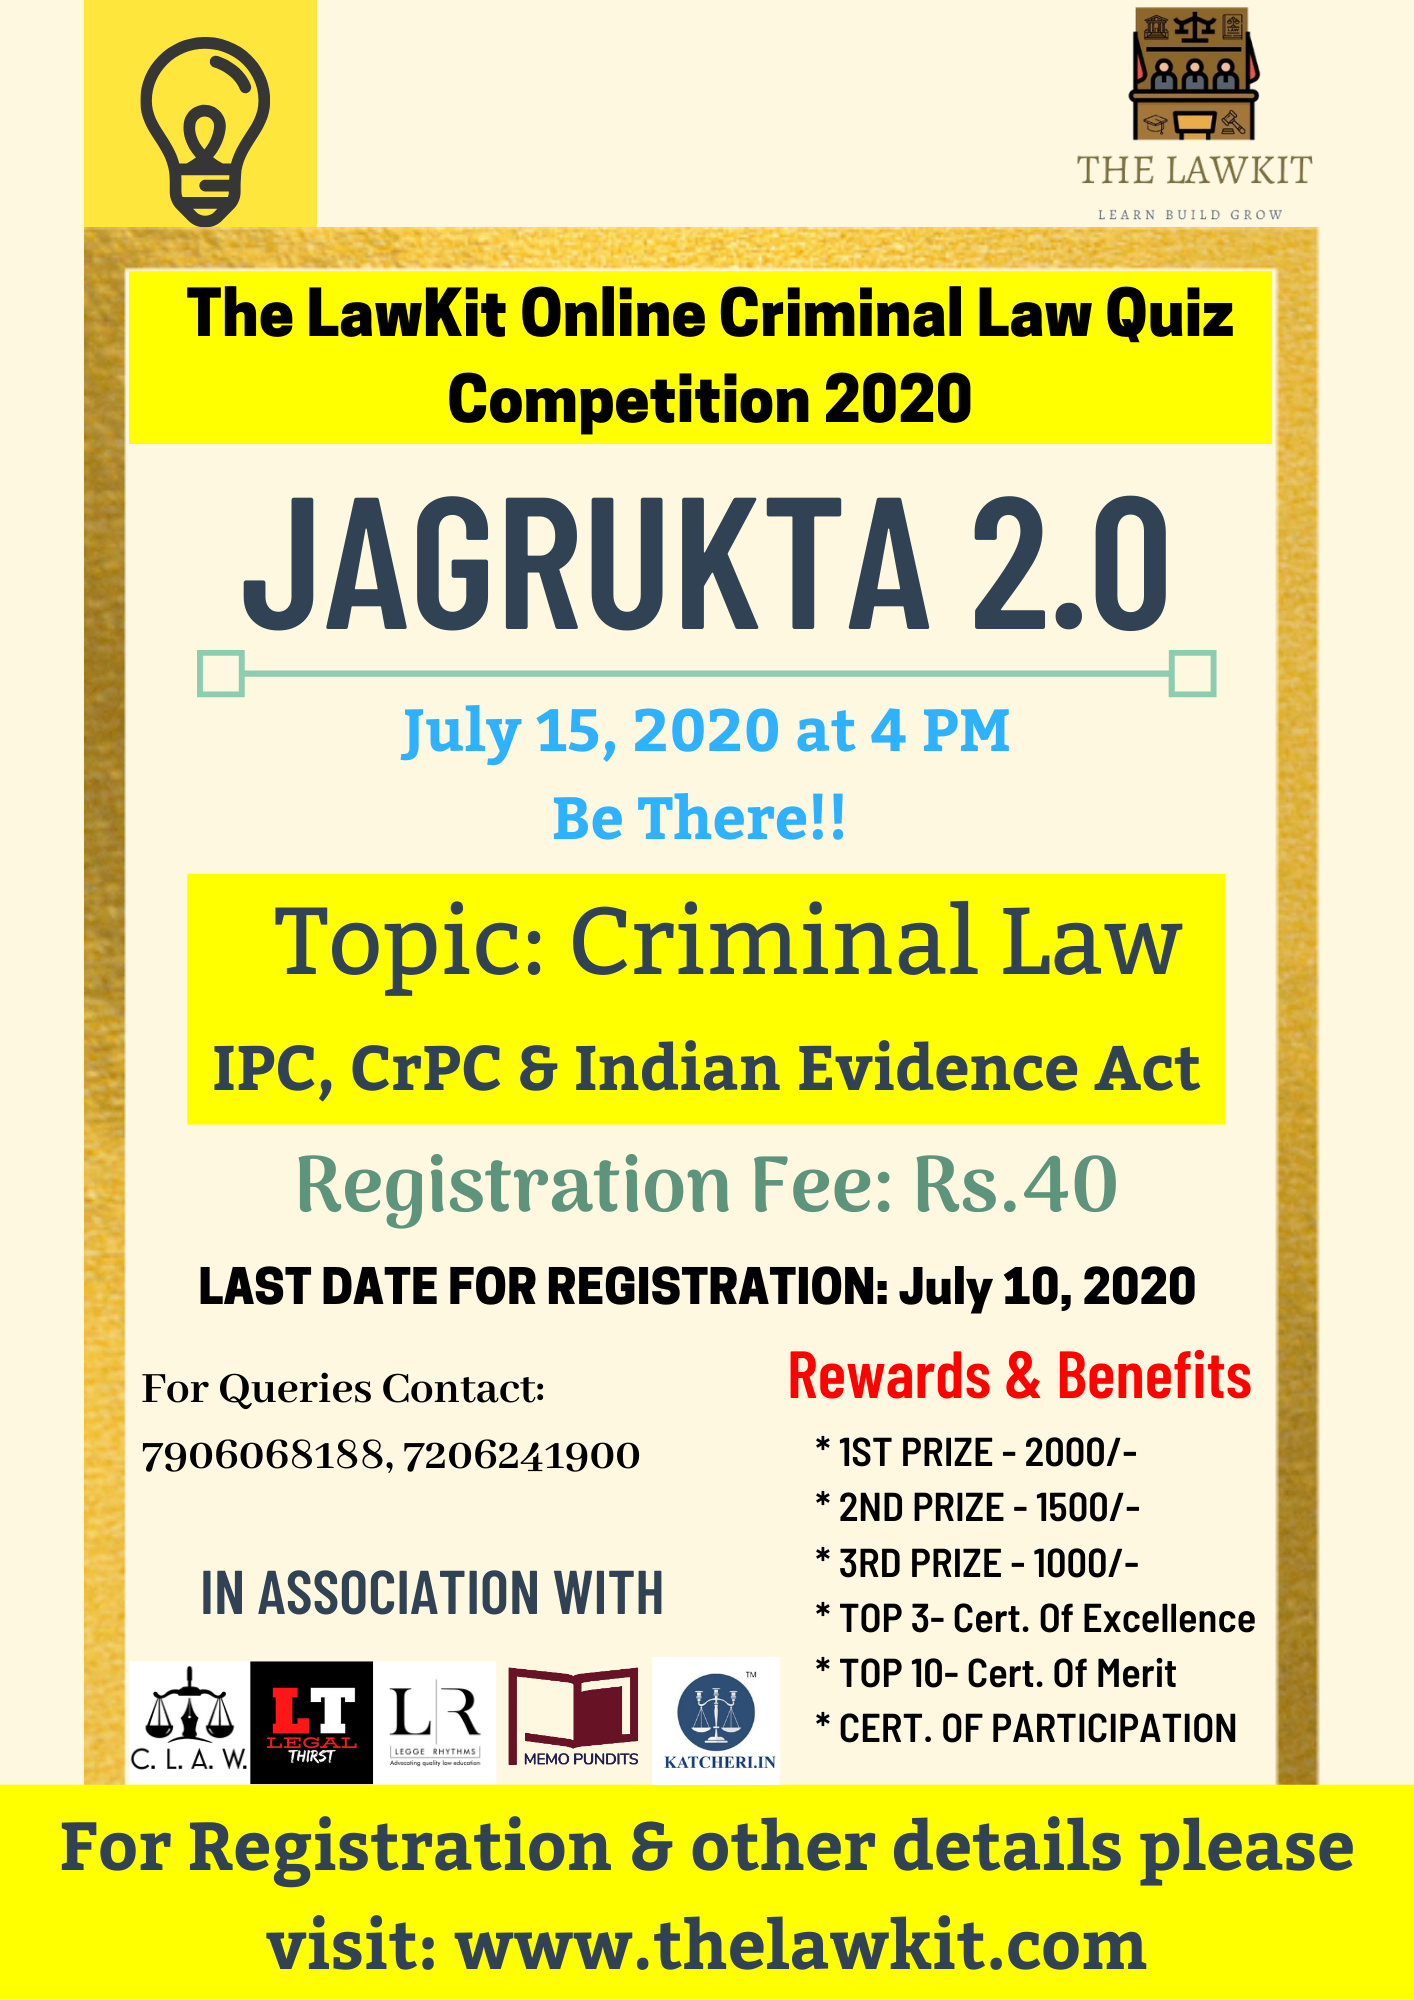 2ND ONLINE QUIZ COMPETITION JAGRUKTA BY THE LAWKIT: REGISTER BY JULY 10